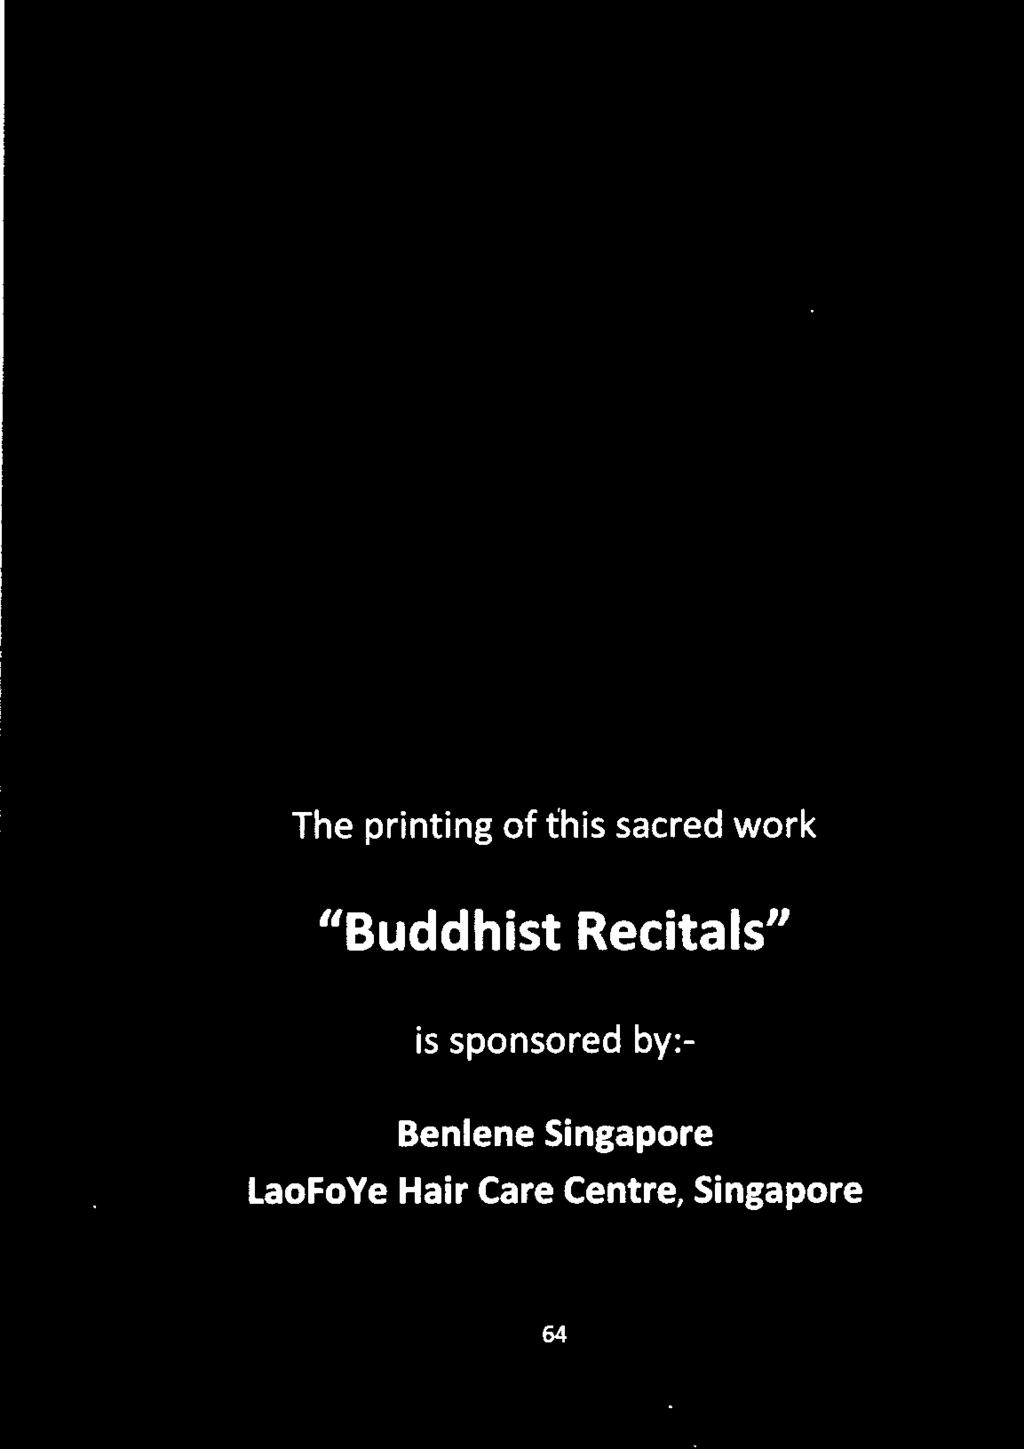 The printing of this sacred work Buddhist Recitals is